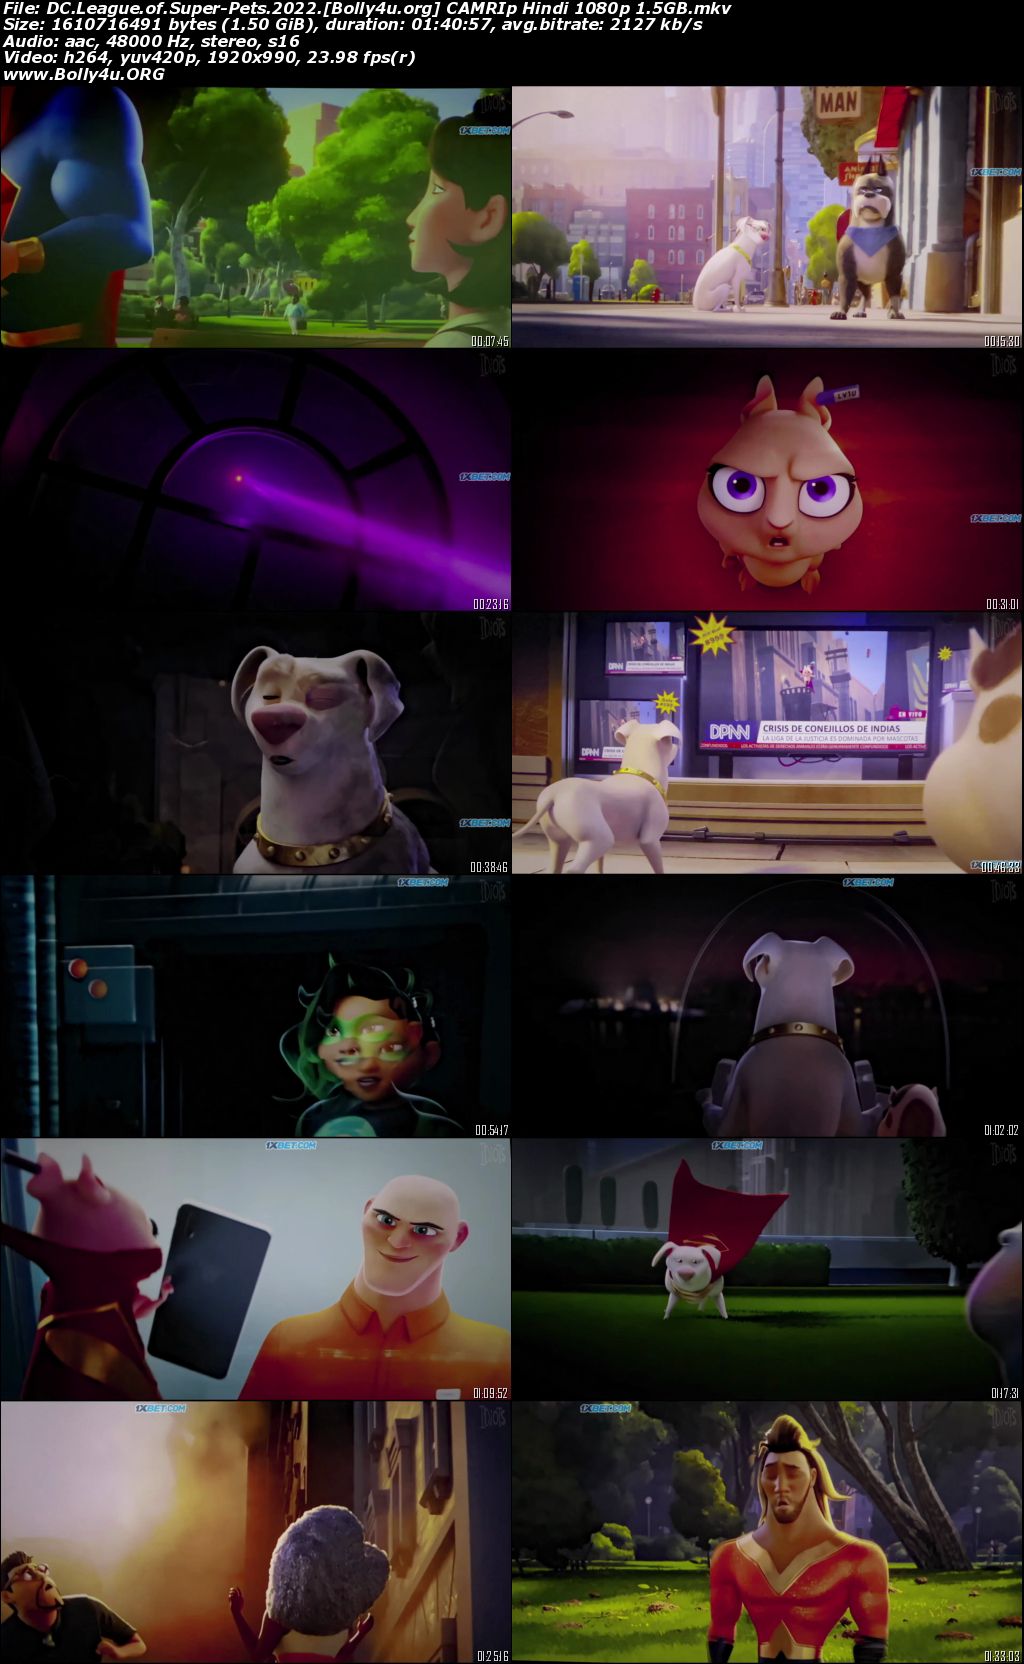 DC League of Super Pets 2022 CAMRip Hindi Dubbed Full Movie Download